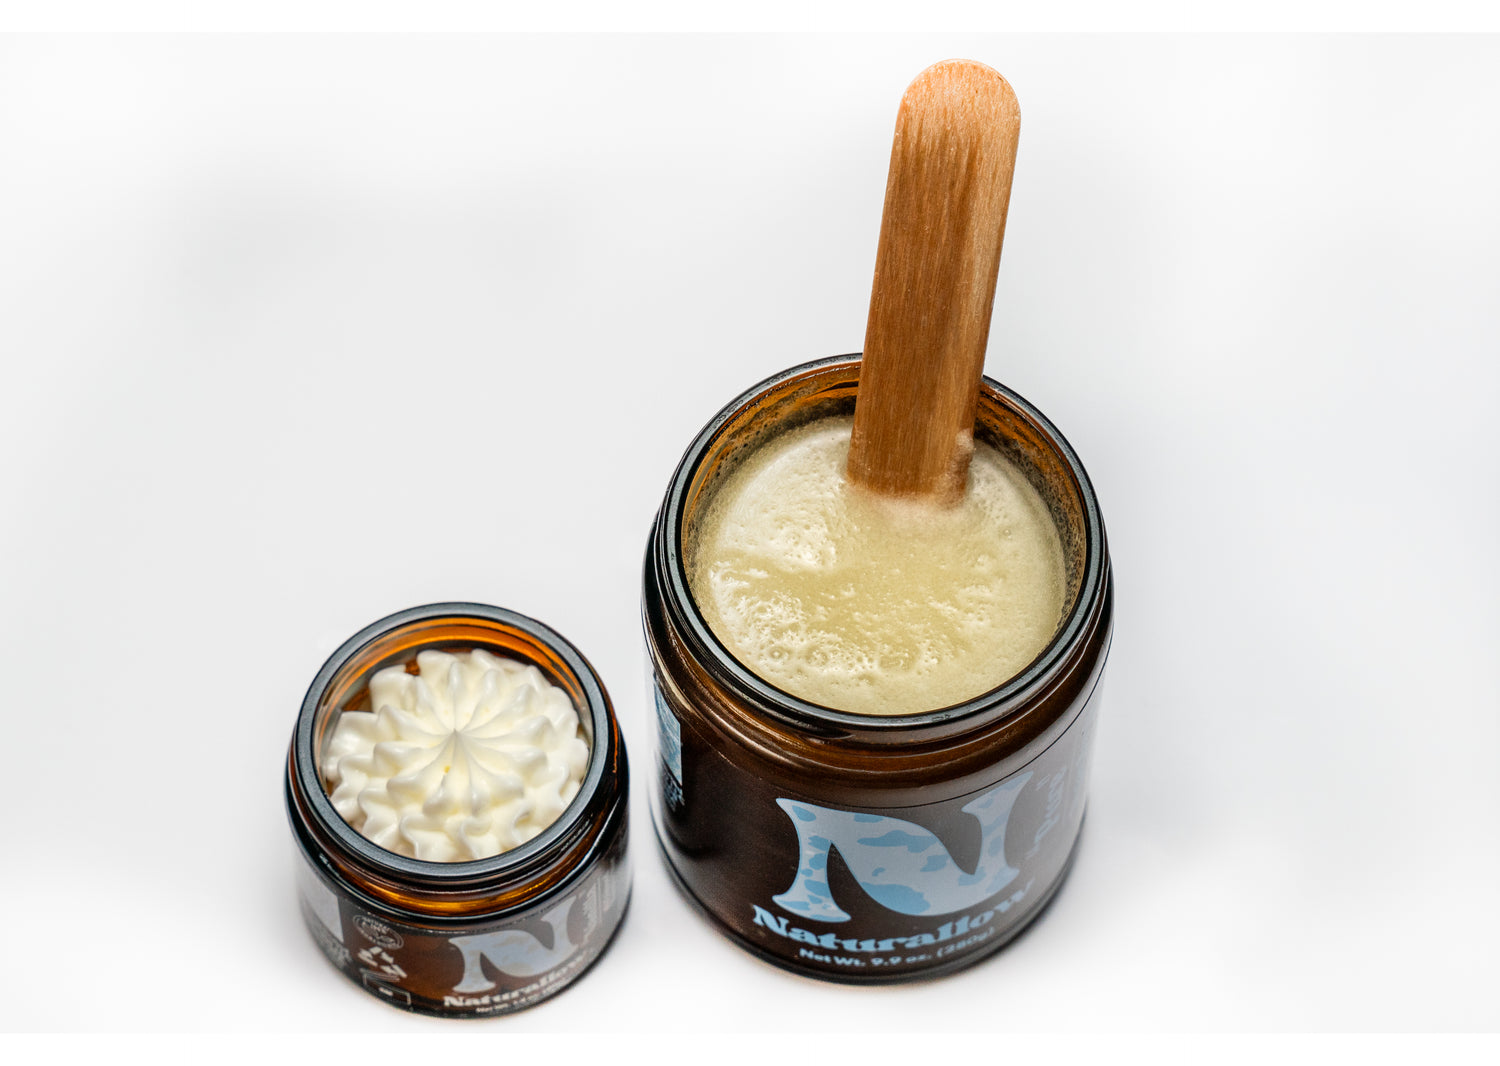 A top down photo showing off two jars. One of Naturallow's Whipped Moisturizer (left) and another Tallow Sugar Scrub (right) sitting side-by-side with the tops off of them